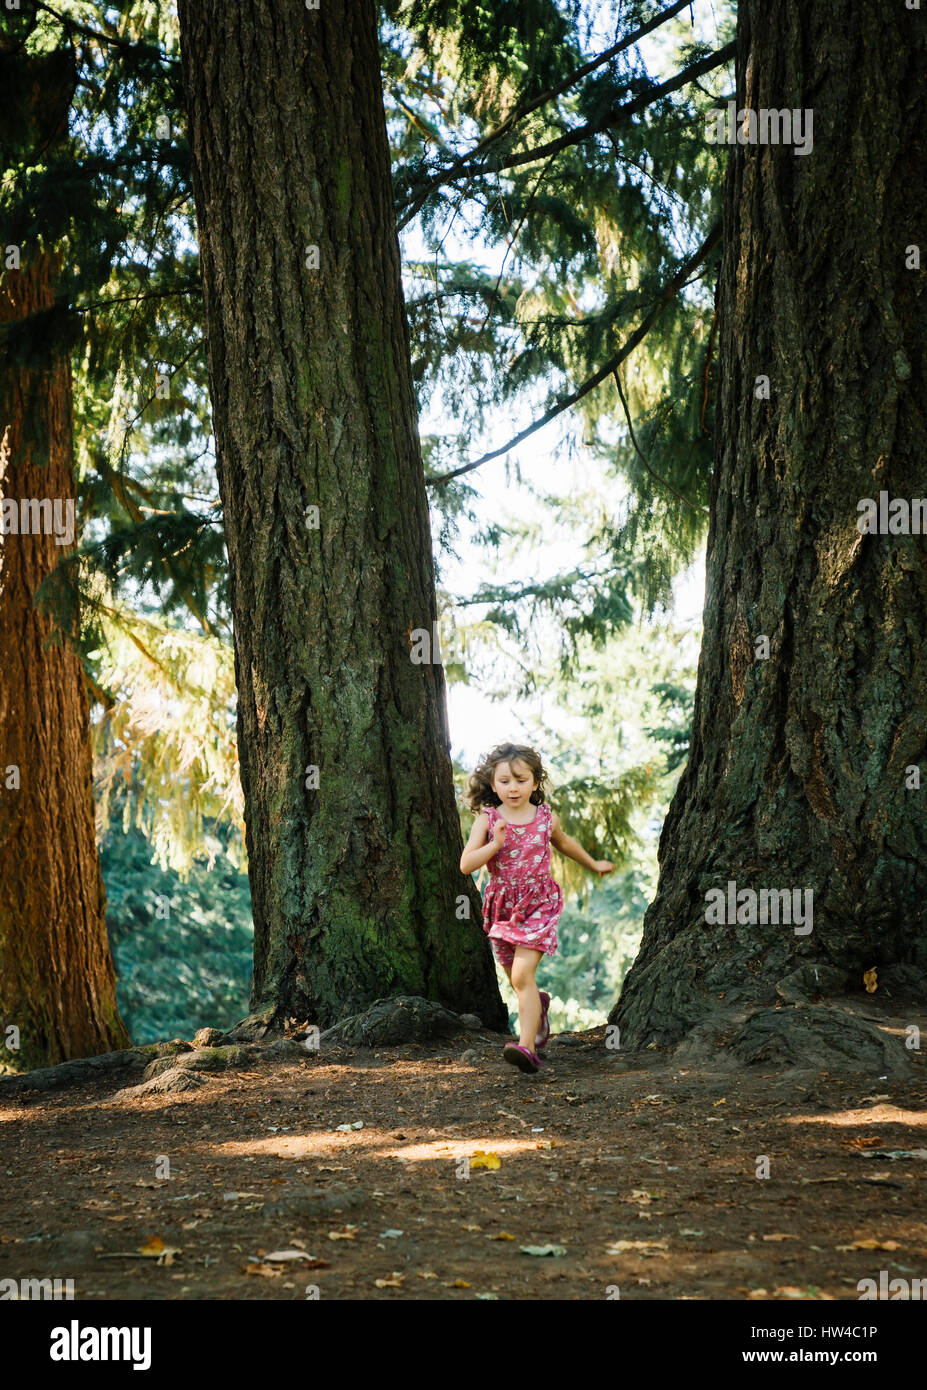 Caucasian girl running in forest Banque D'Images